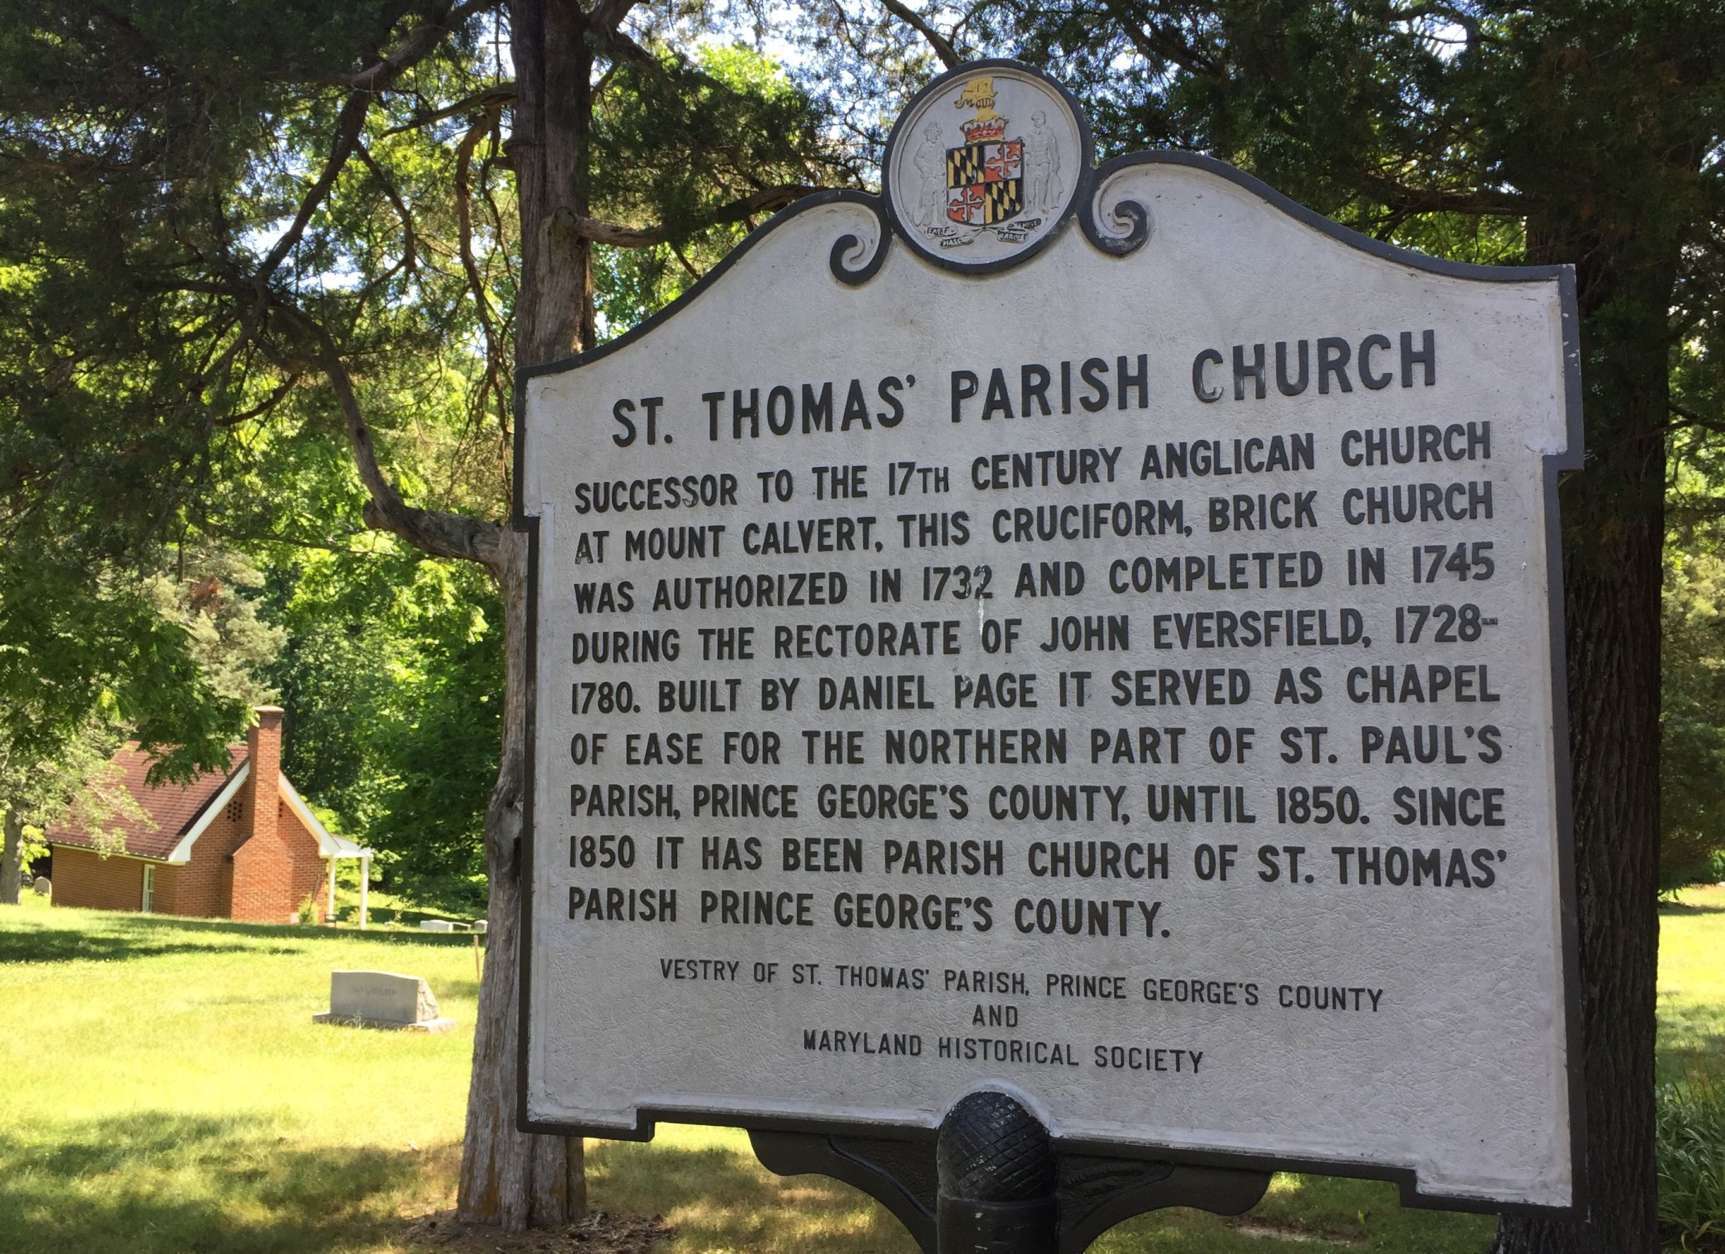 St. Thomas' Church is in a rural portion of Prince George's County with plenty of country stores and historic markers. (WTOP/Kristi King)